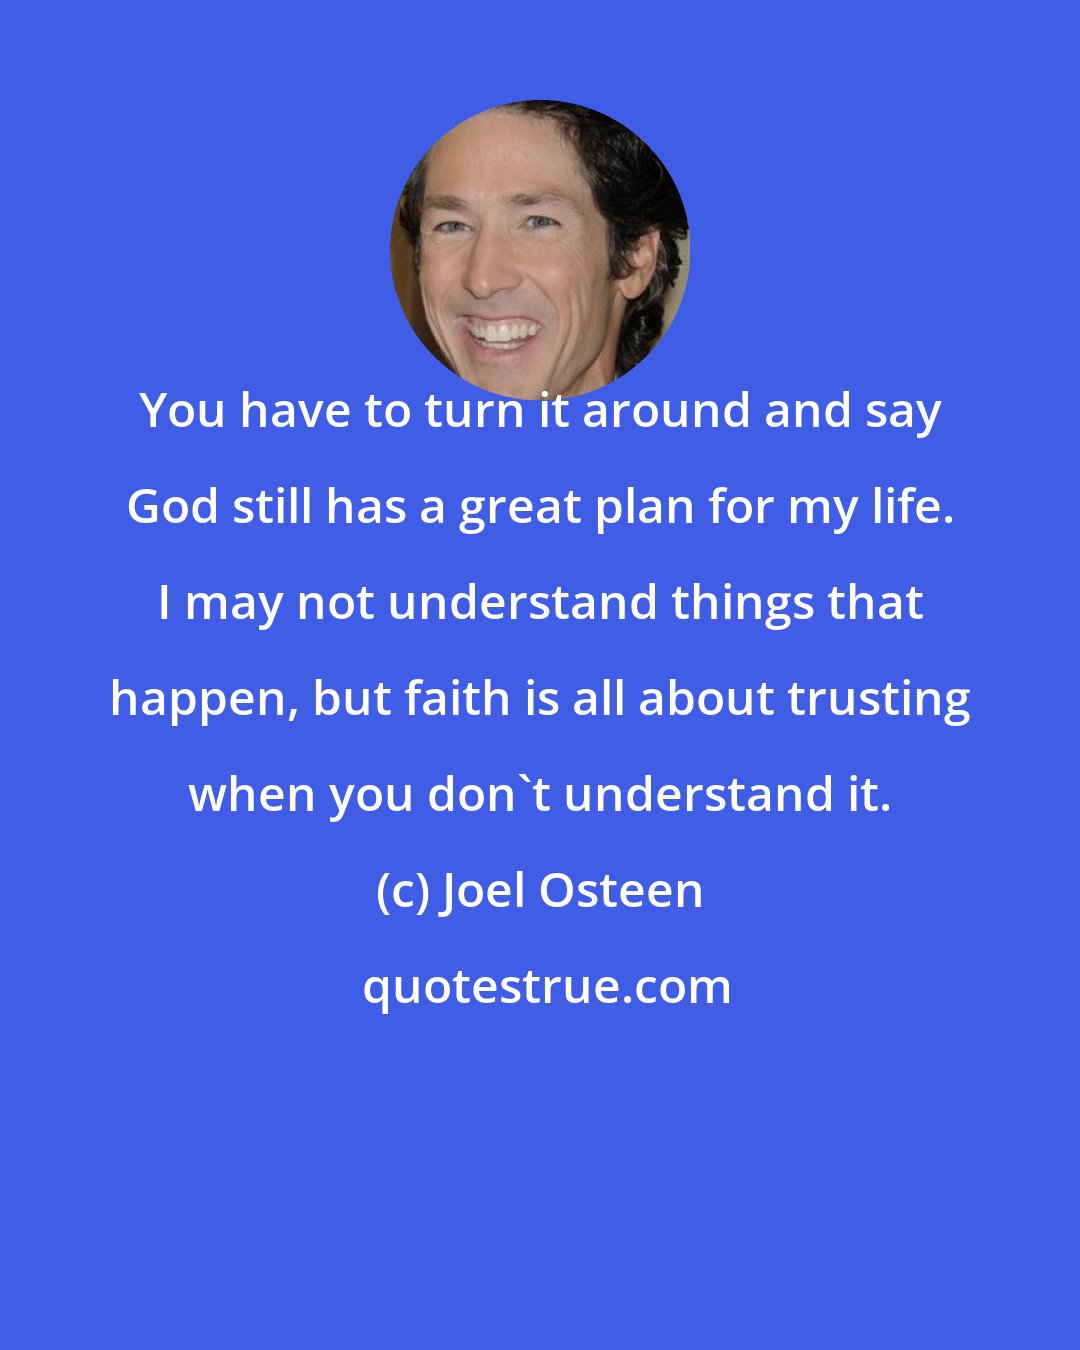 Joel Osteen: You have to turn it around and say God still has a great plan for my life. I may not understand things that happen, but faith is all about trusting when you don't understand it.